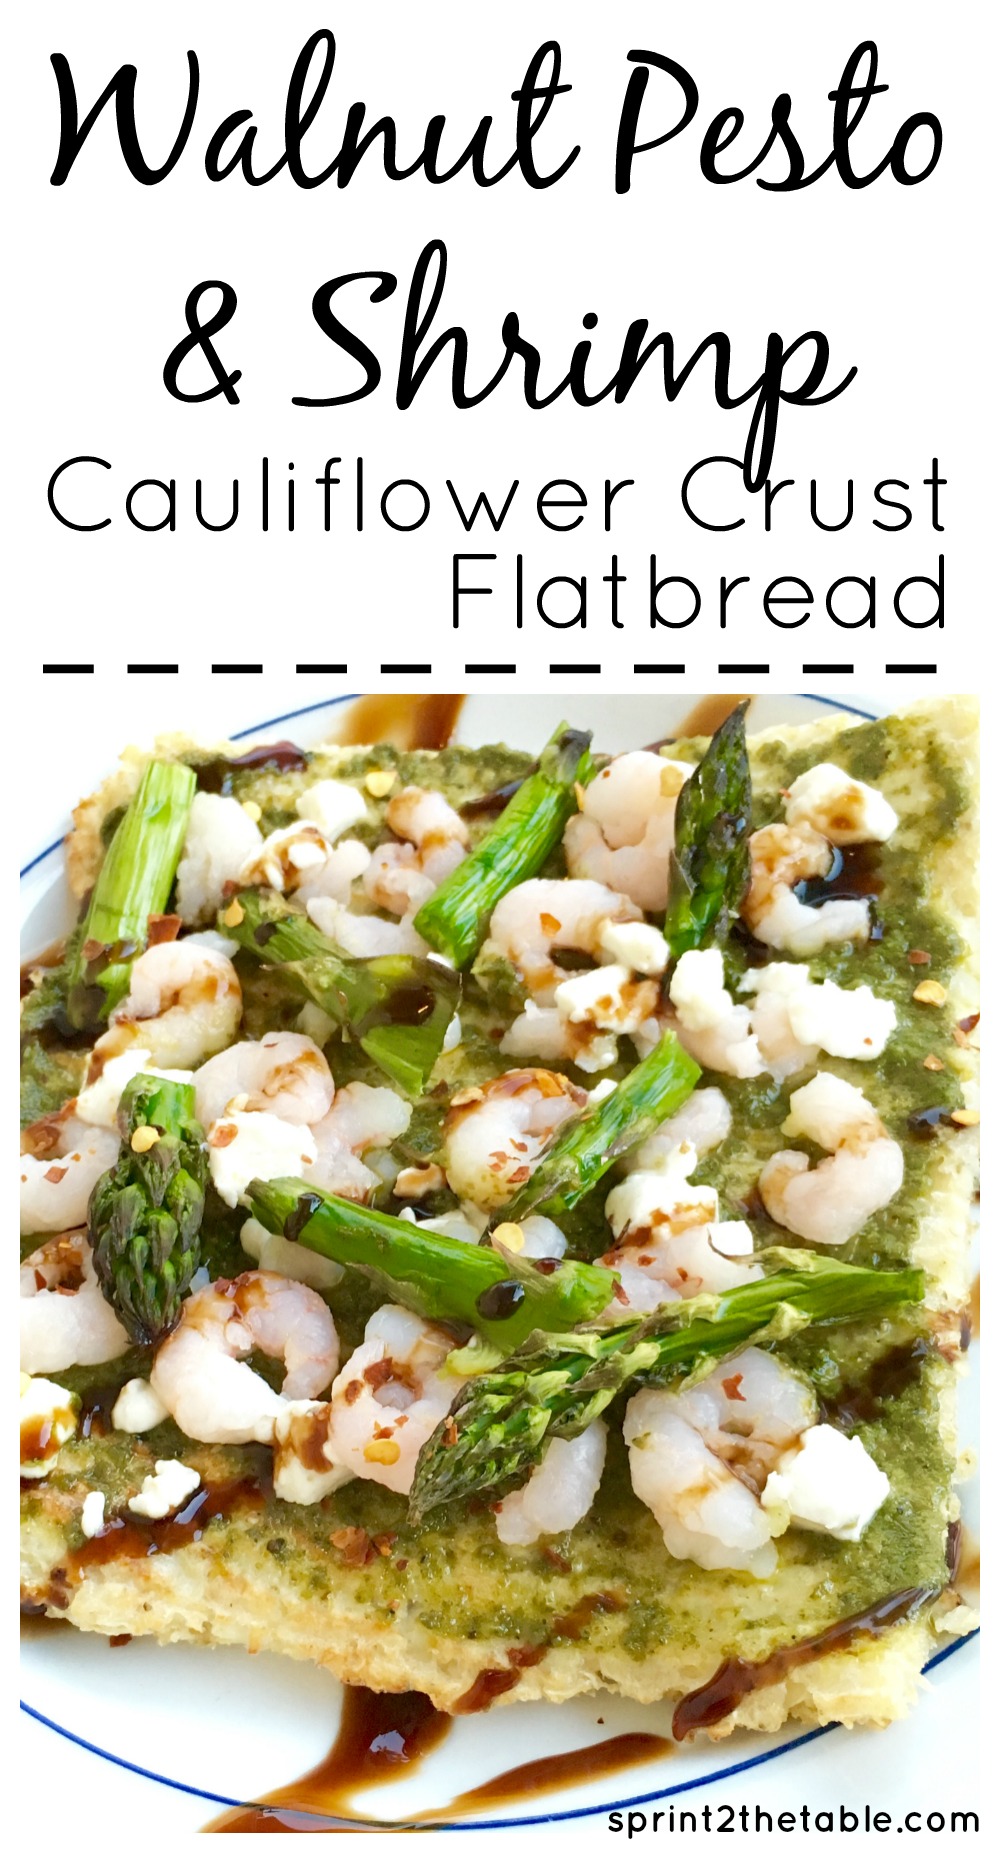 Walnut Pesto & Shrimp Cauliflower Crust Flatbread - if you're a pizza-lover, you have to try this healthy, dairy-free twist on crust!